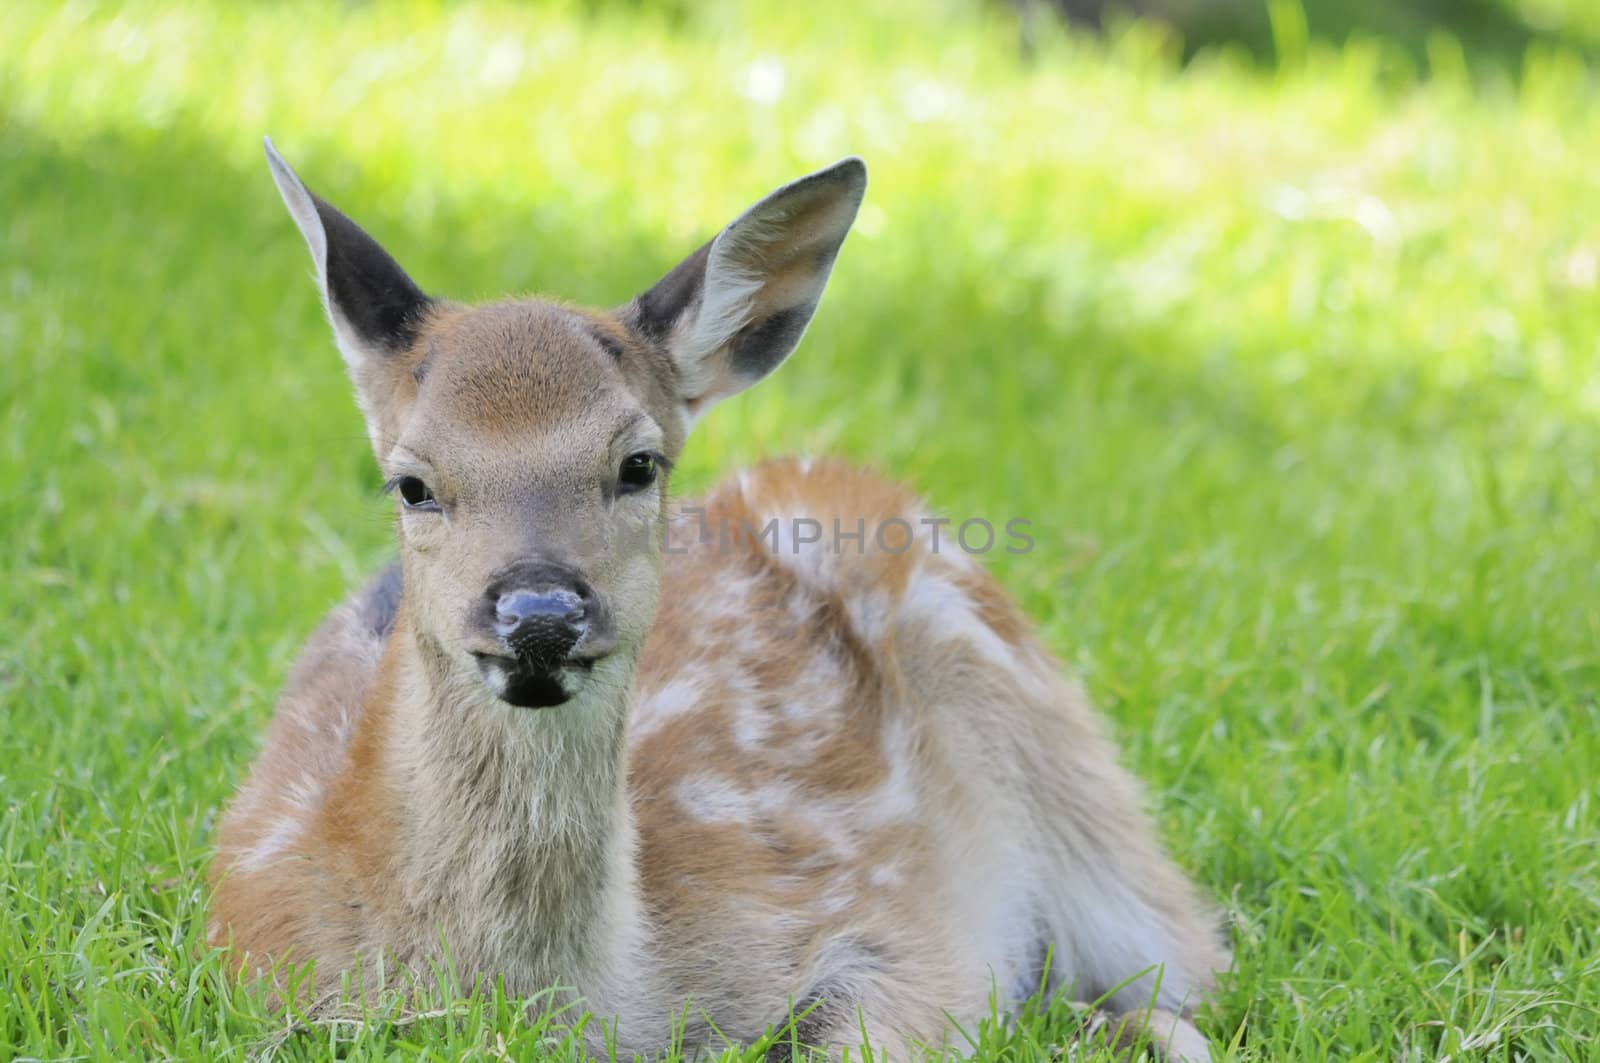 Young doe by fahrner